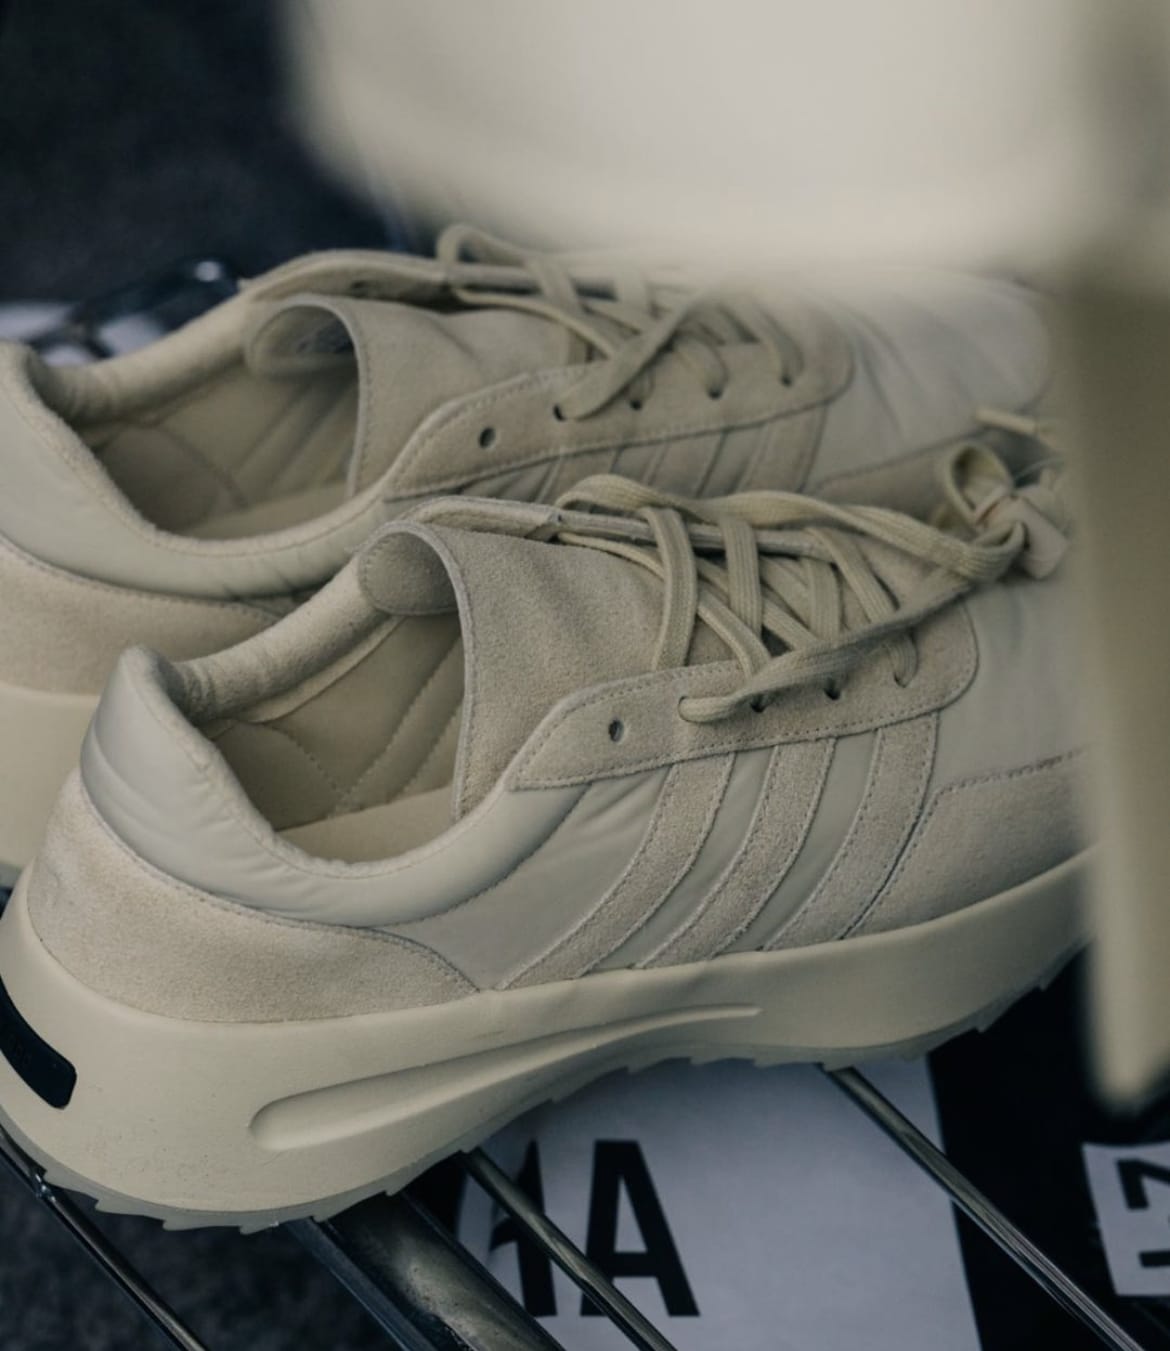 Jerry Lorenzo Previews More Fear of God x Adidas Collabs | Sole Collector